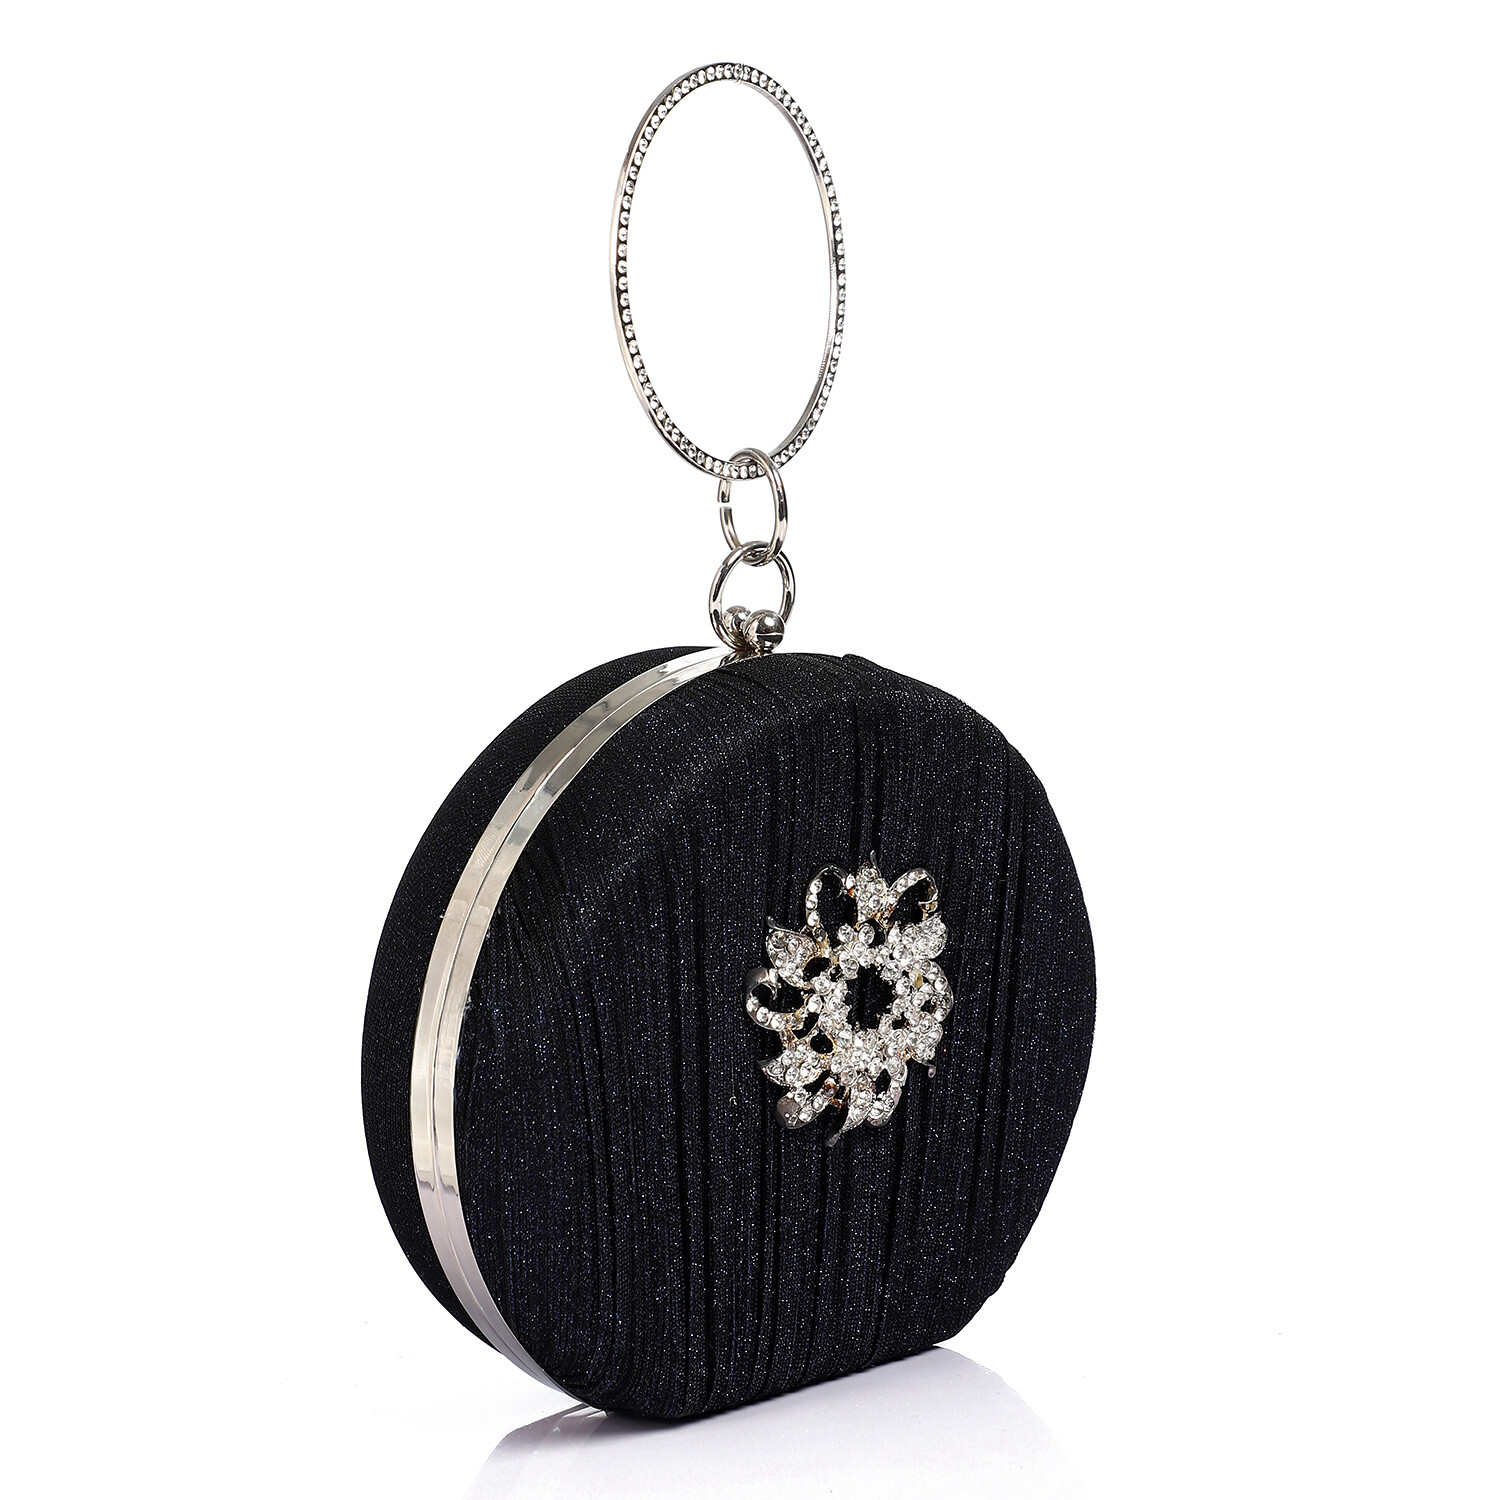 Oval Shaped Gittery Clutch with Decorative Front Flower - Navy Blue-4938